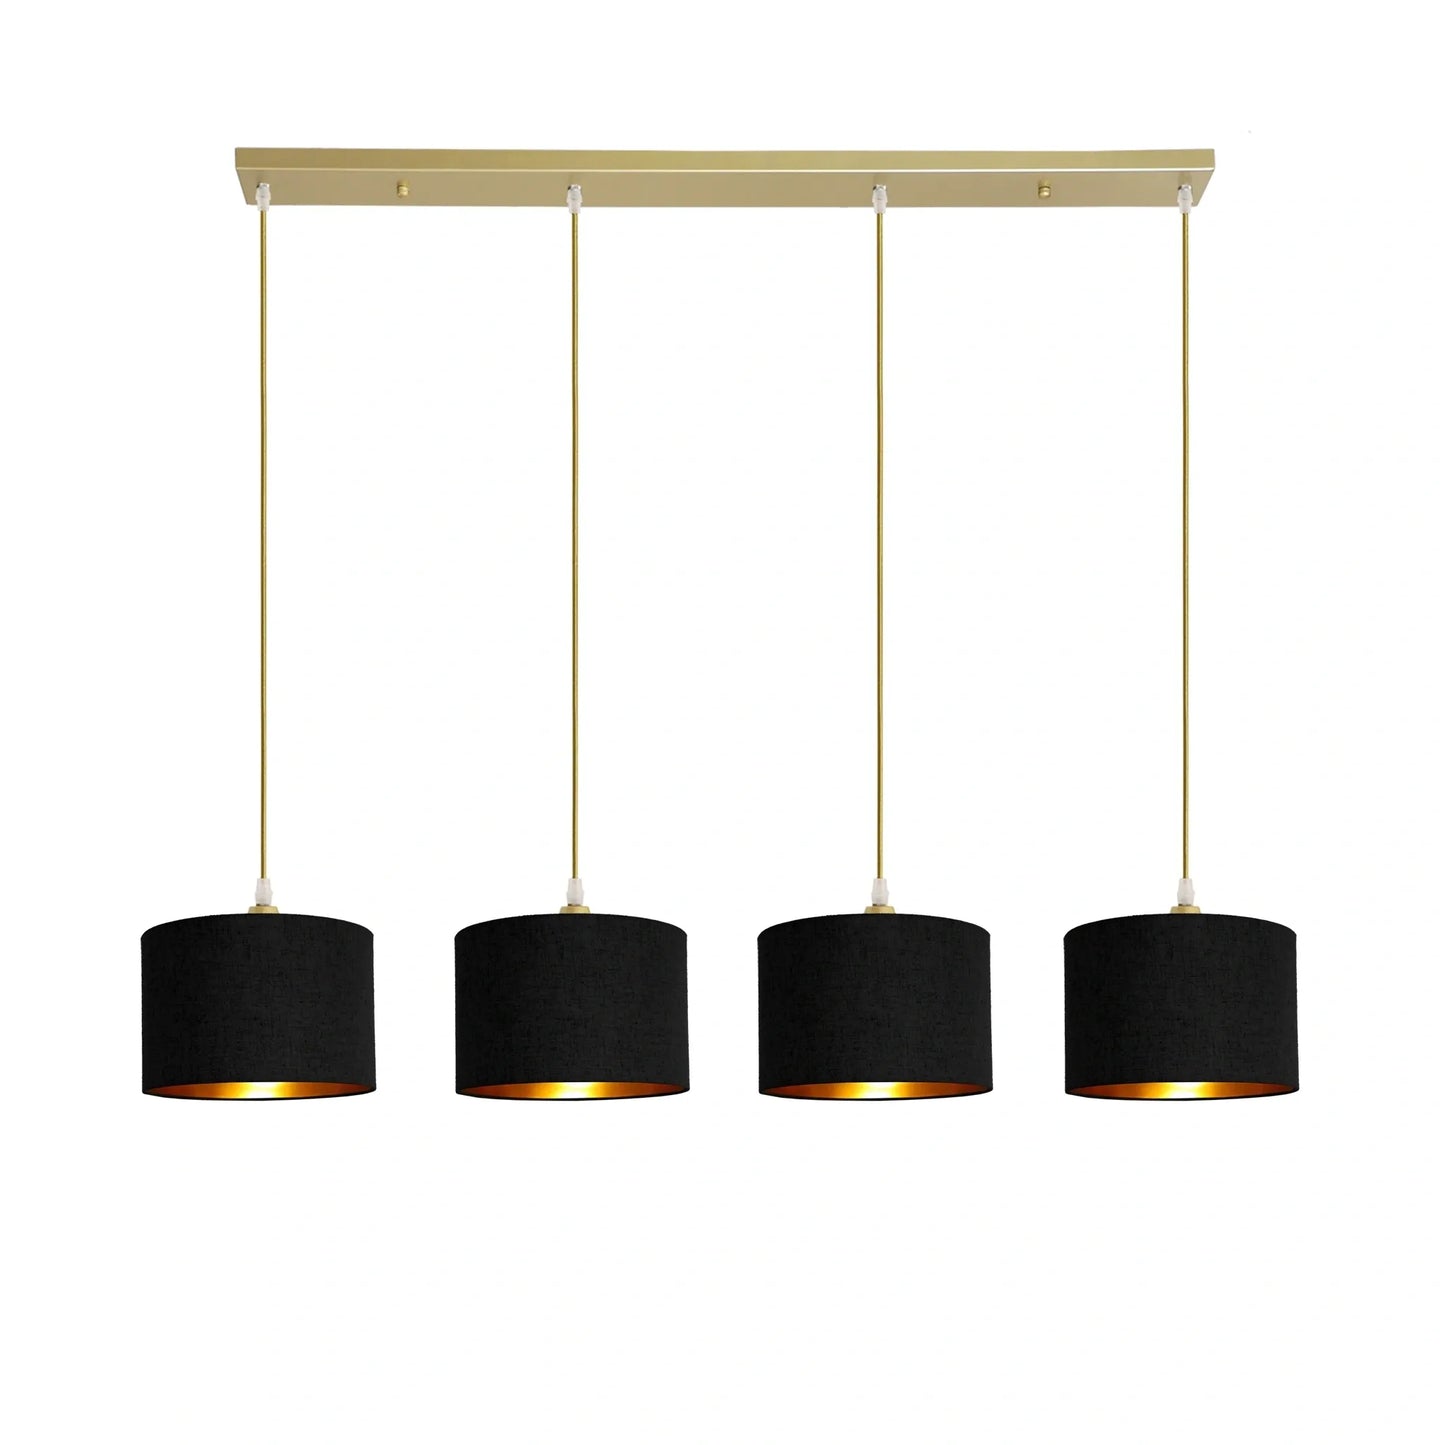 Murano 4 Light Gold bar with woven hand made fabric shades